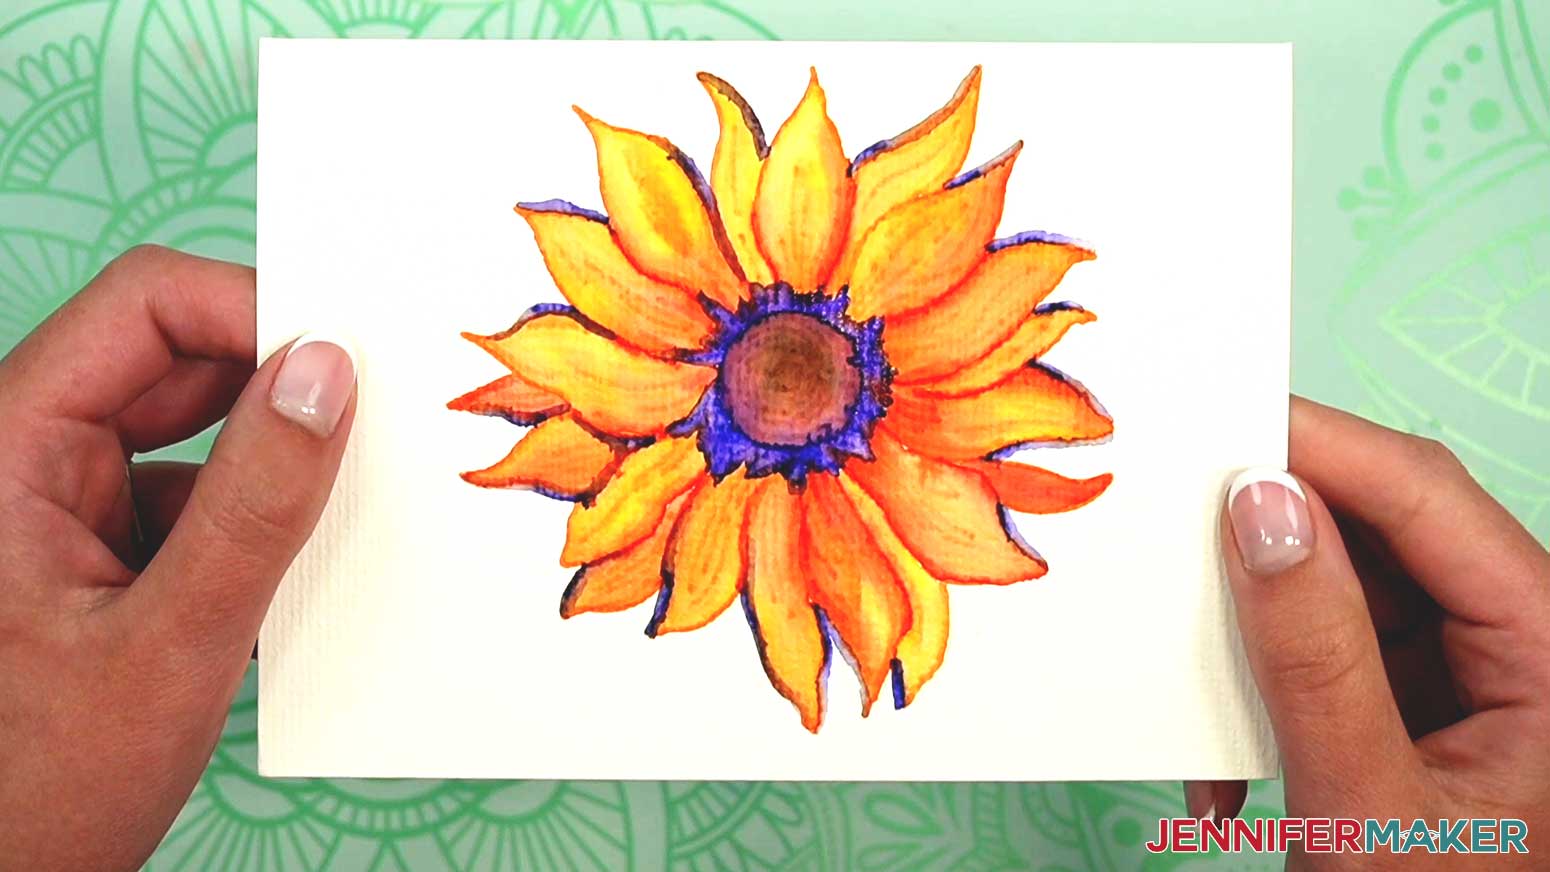 The watercolor sunflower is complete and ready to display.